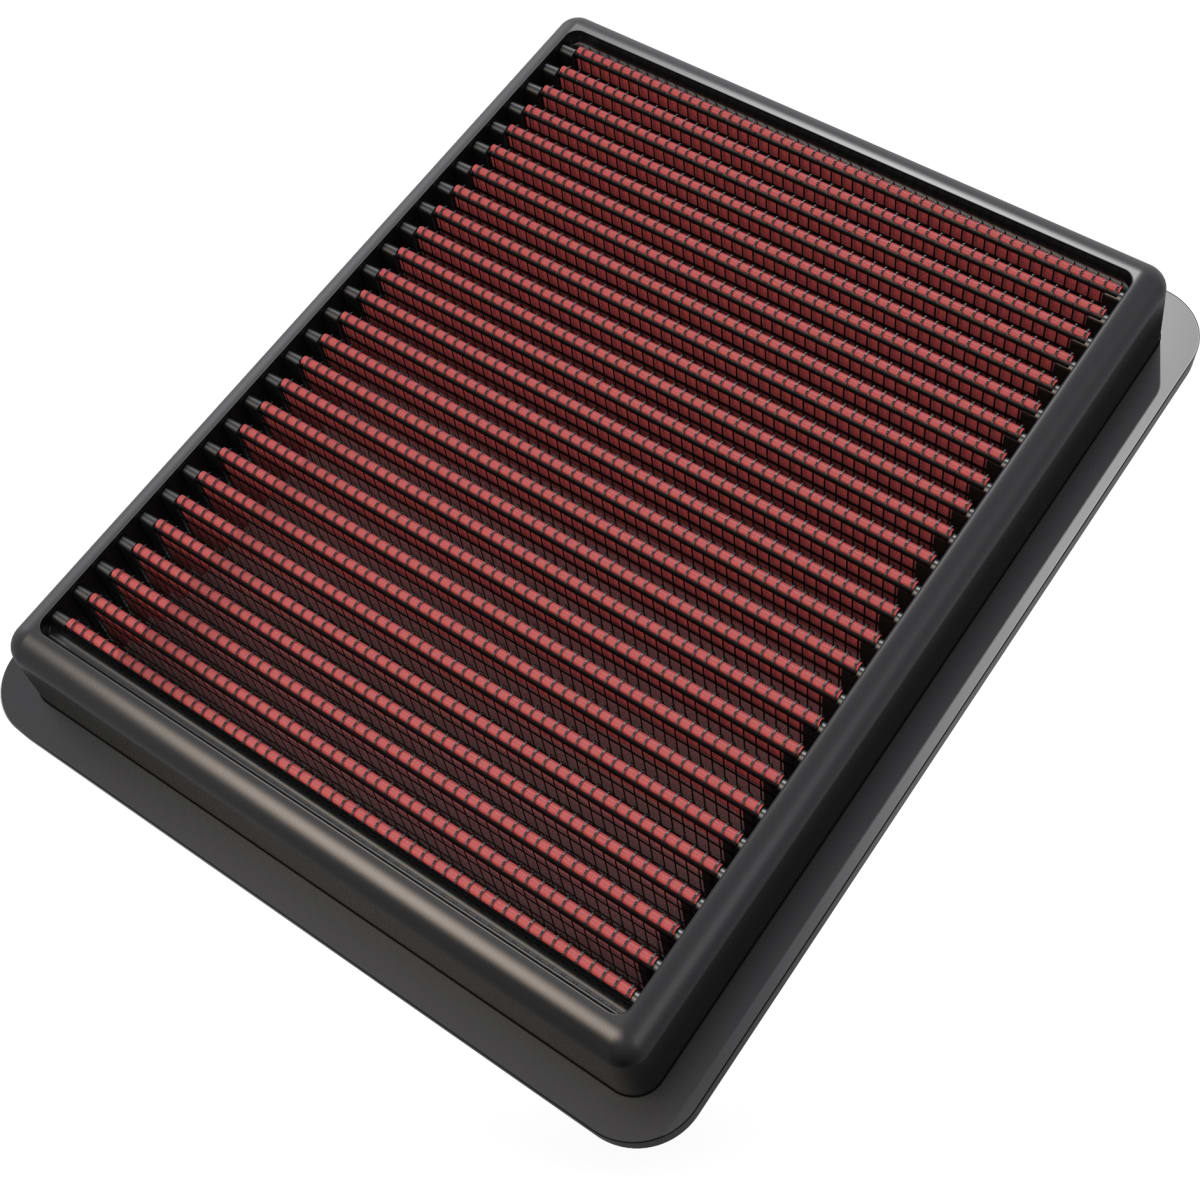 K&N® Engine Air Filter - High Performance, Premium, Washable, Replacement Filter - 33-3024